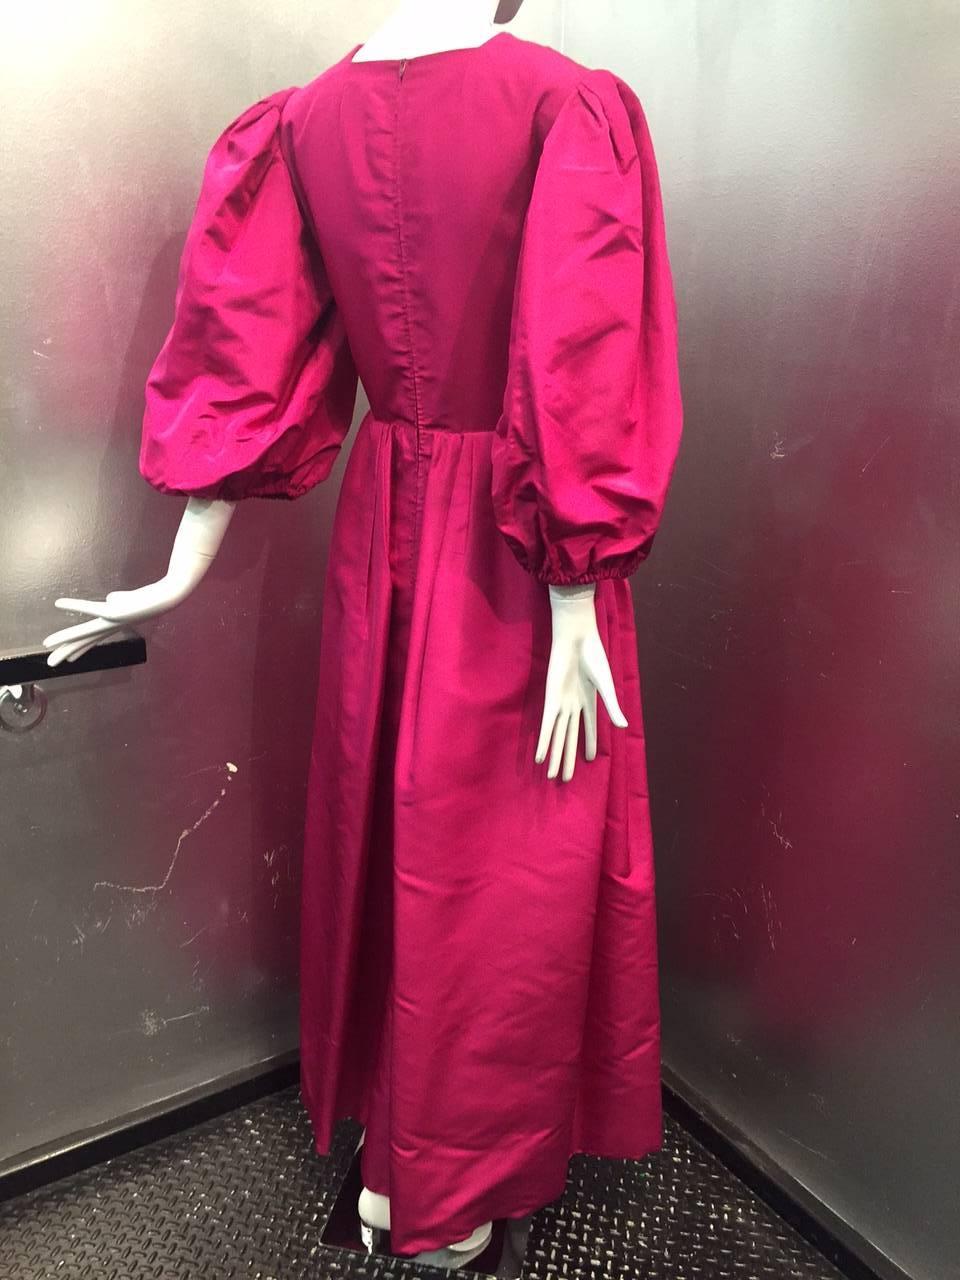 1970s Pauline Trigere Fuchsia Silk Faille Evening Gown with Balloon Sleeves  In Excellent Condition For Sale In Gresham, OR